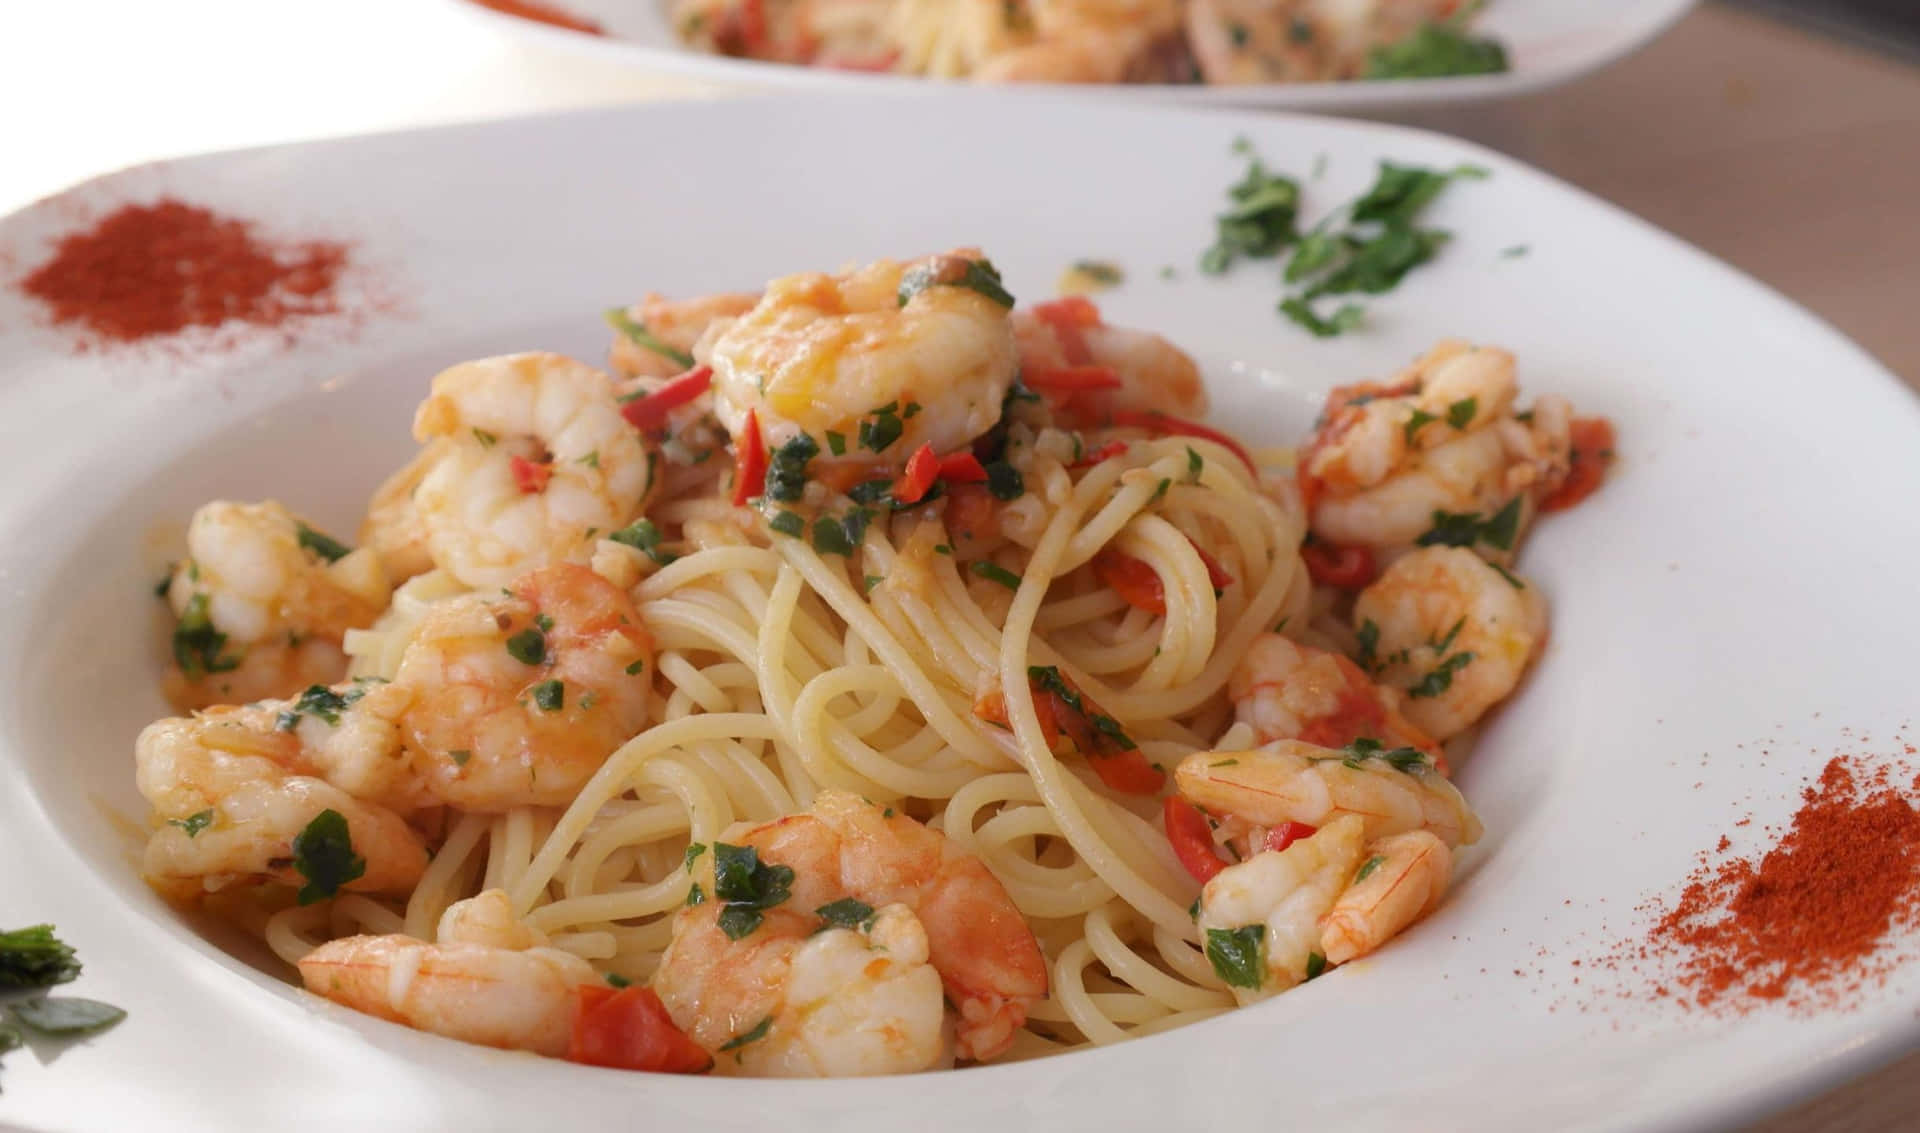 A Plate Of Pasta With Shrimp And Peppers